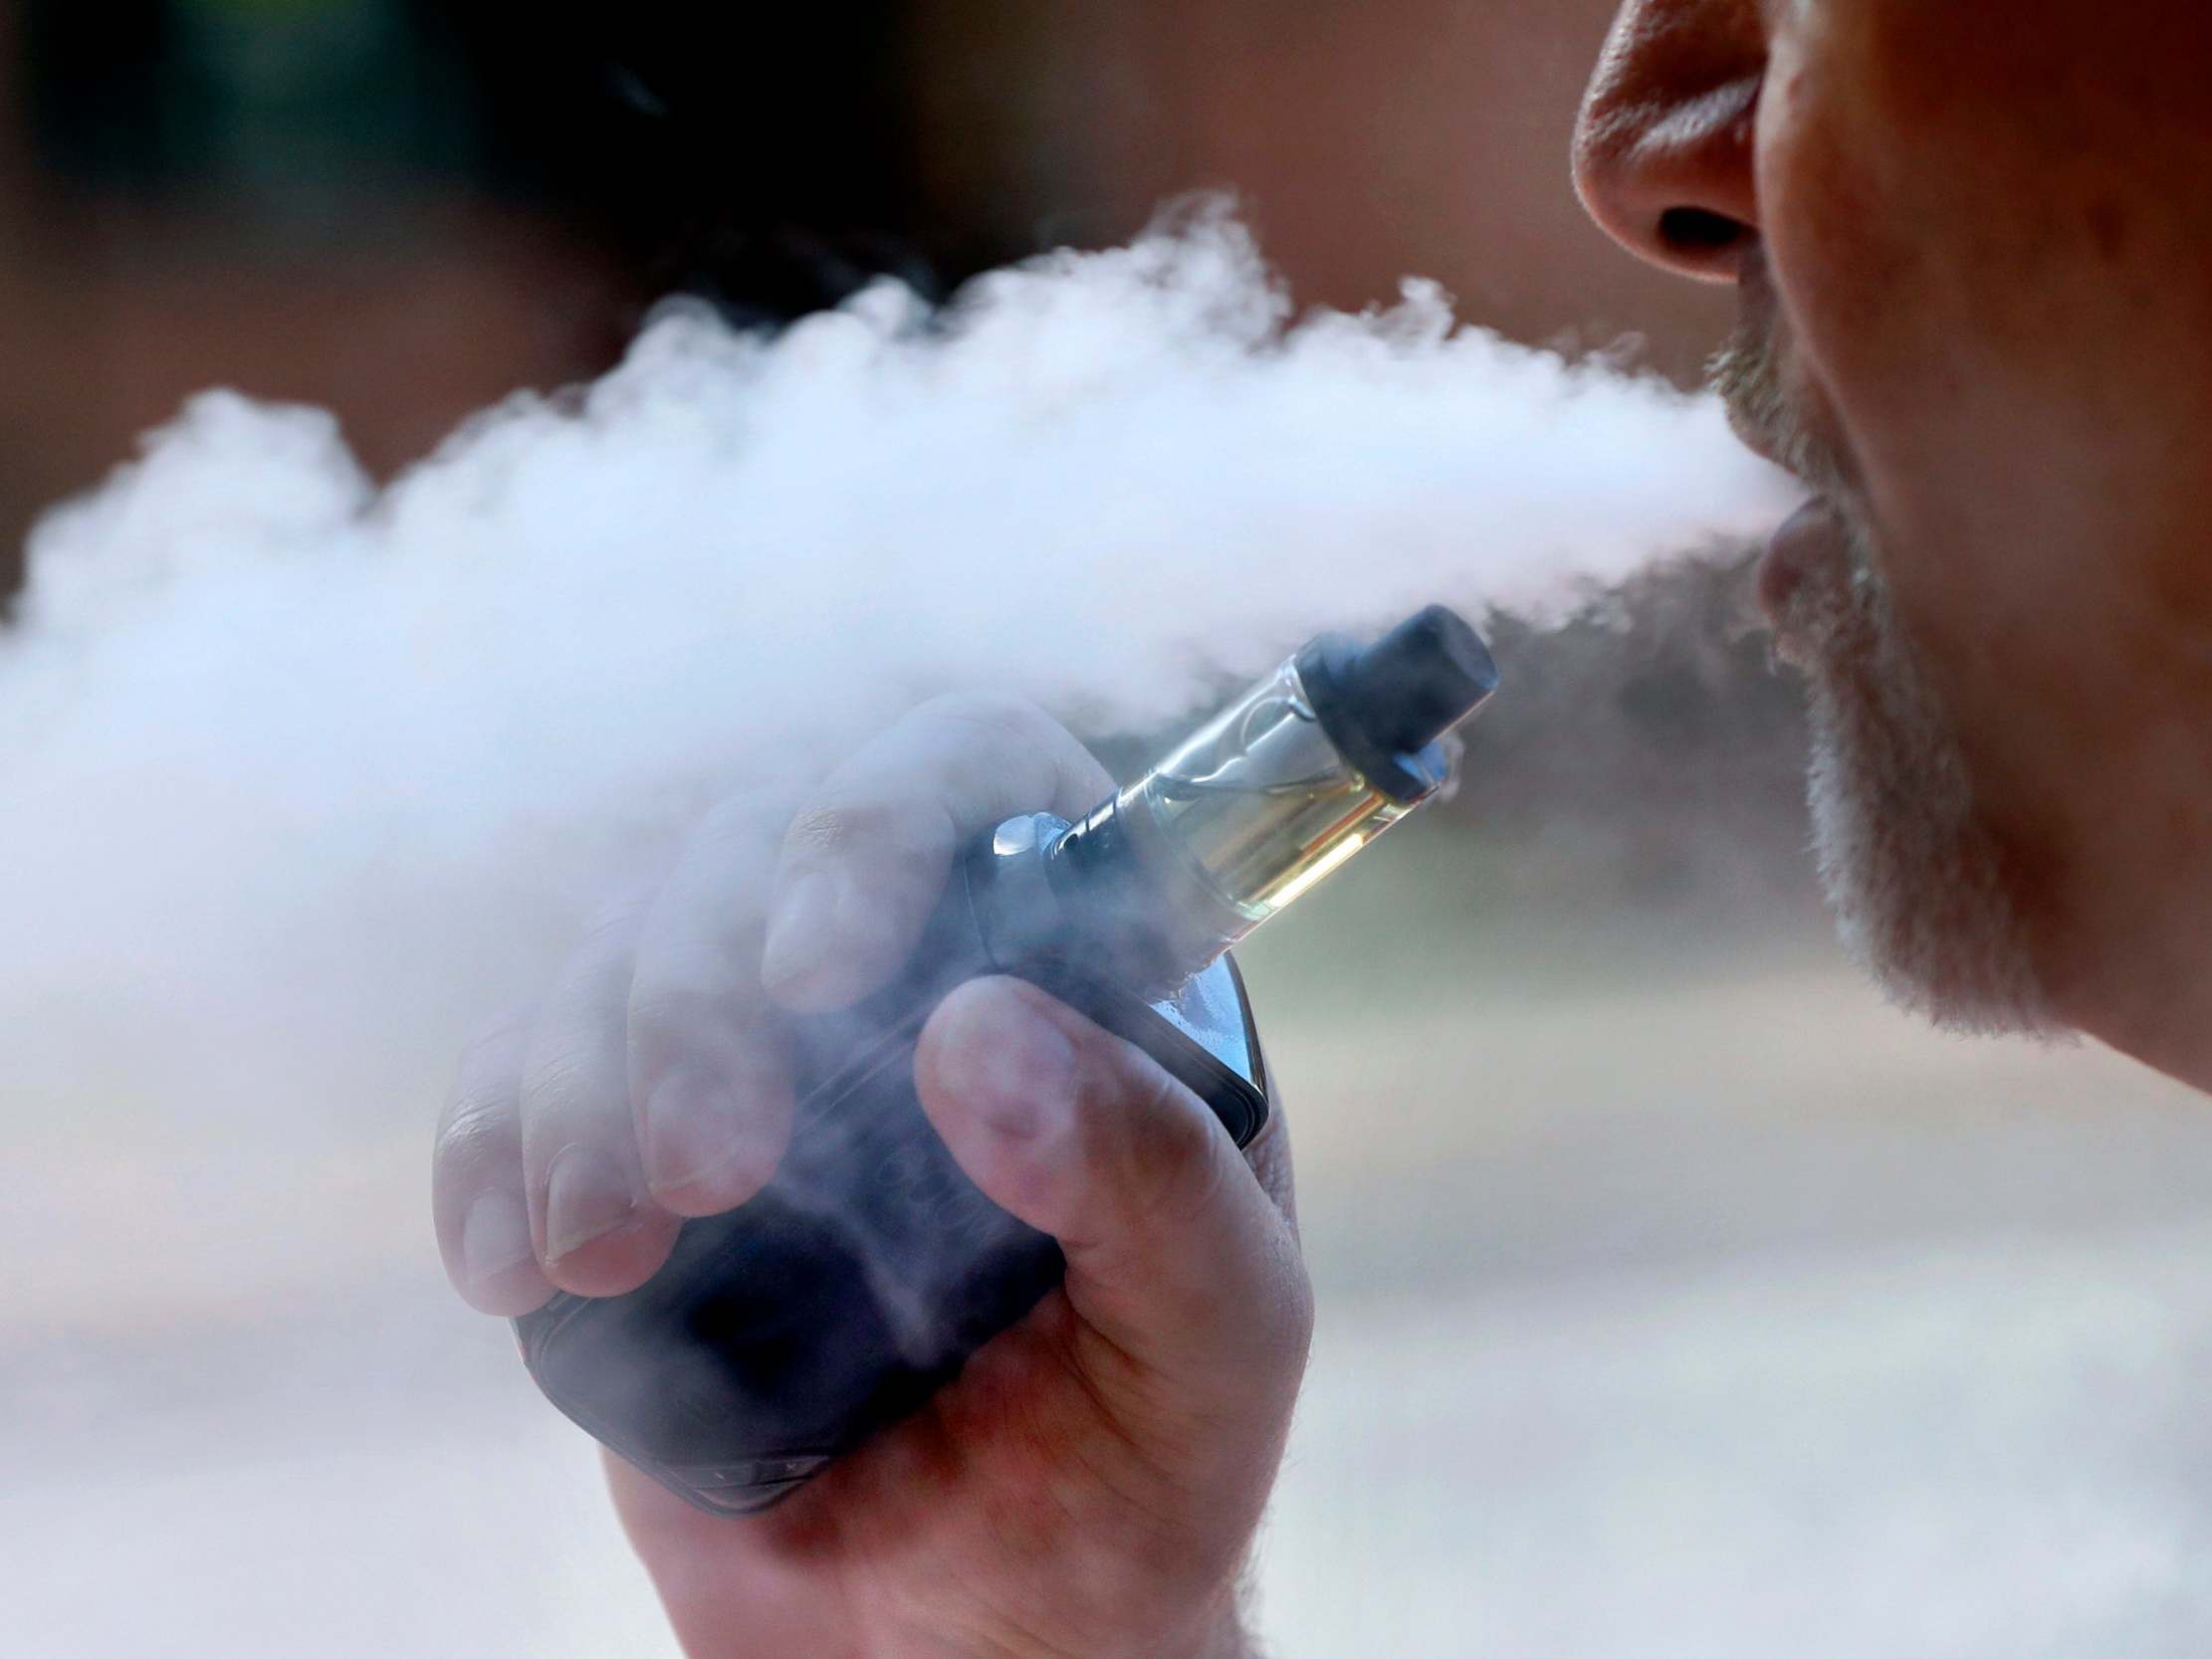 E-cigarette vapour contains tiny particles that carry flavour. Some early-stage laboratory and animal studies suggest these can damage the lungs